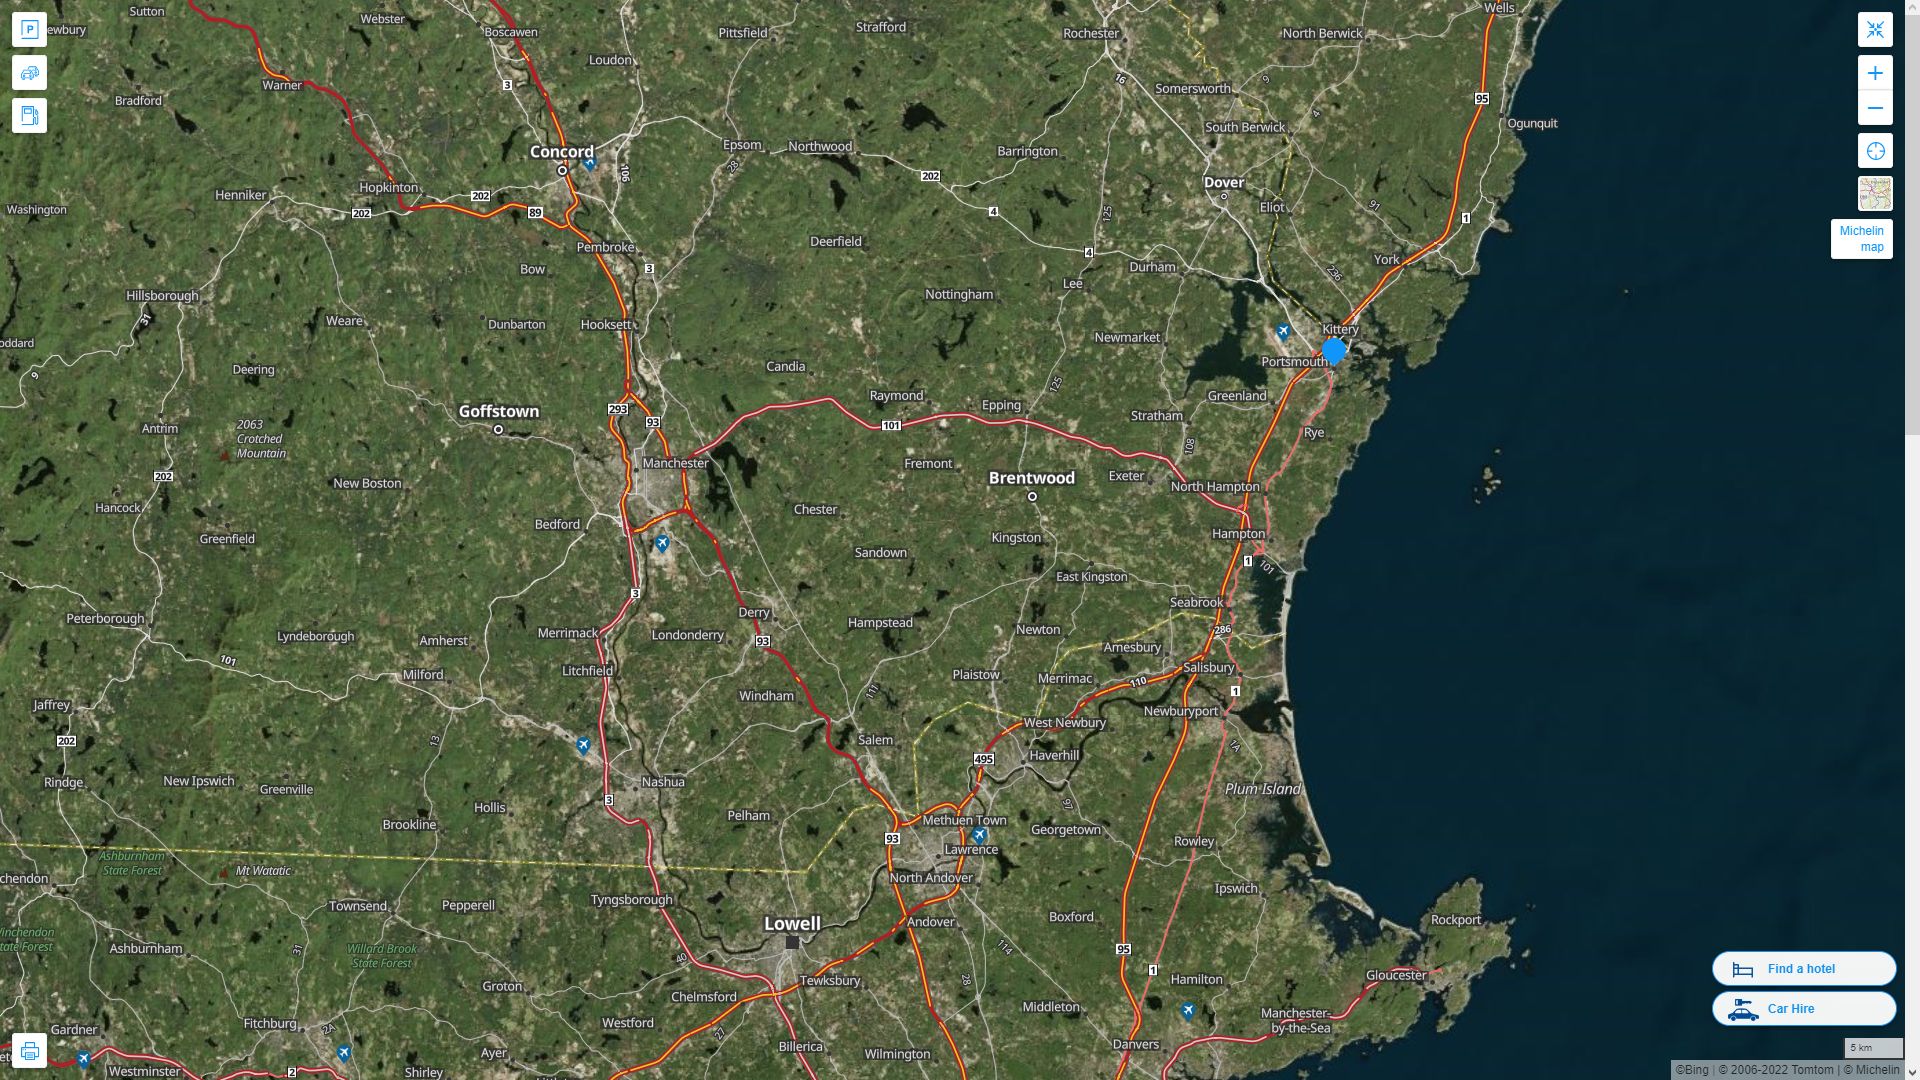 Portsmouth New Hampshire Highway and Road Map with Satellite View